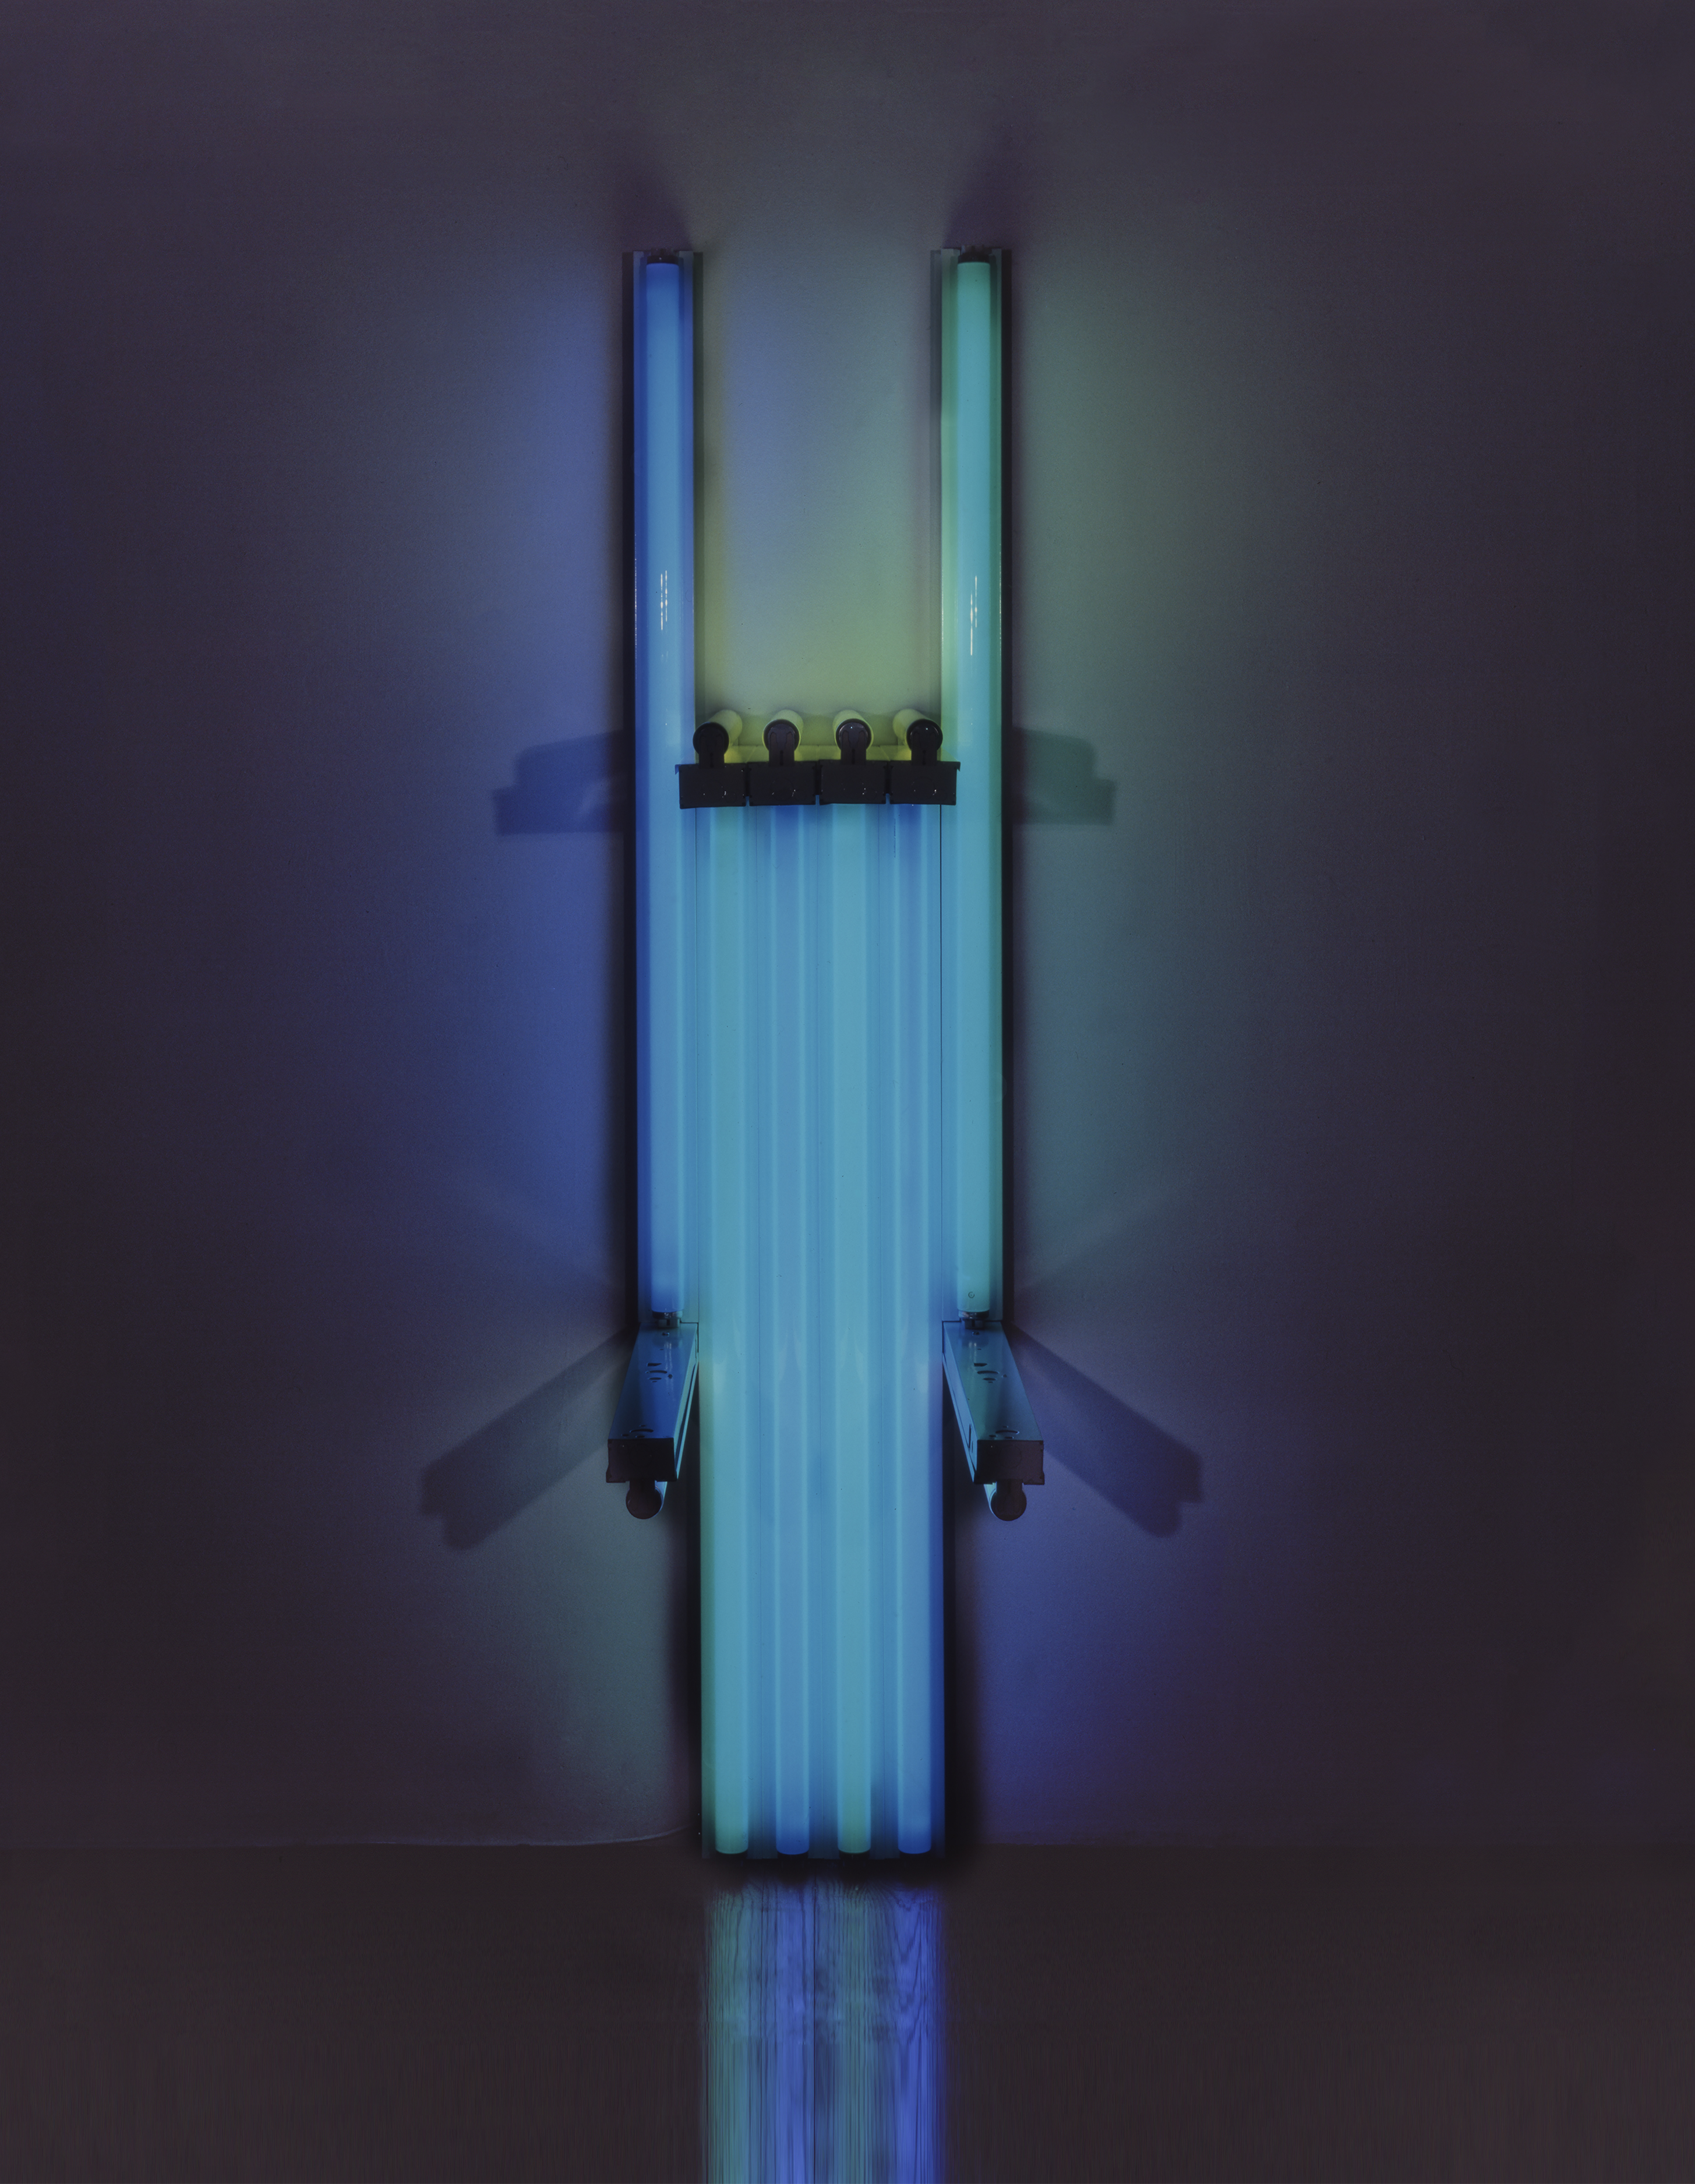 Dan Flavin’s light sculpture untitled (to Lucie Rie, master potter), 1990.